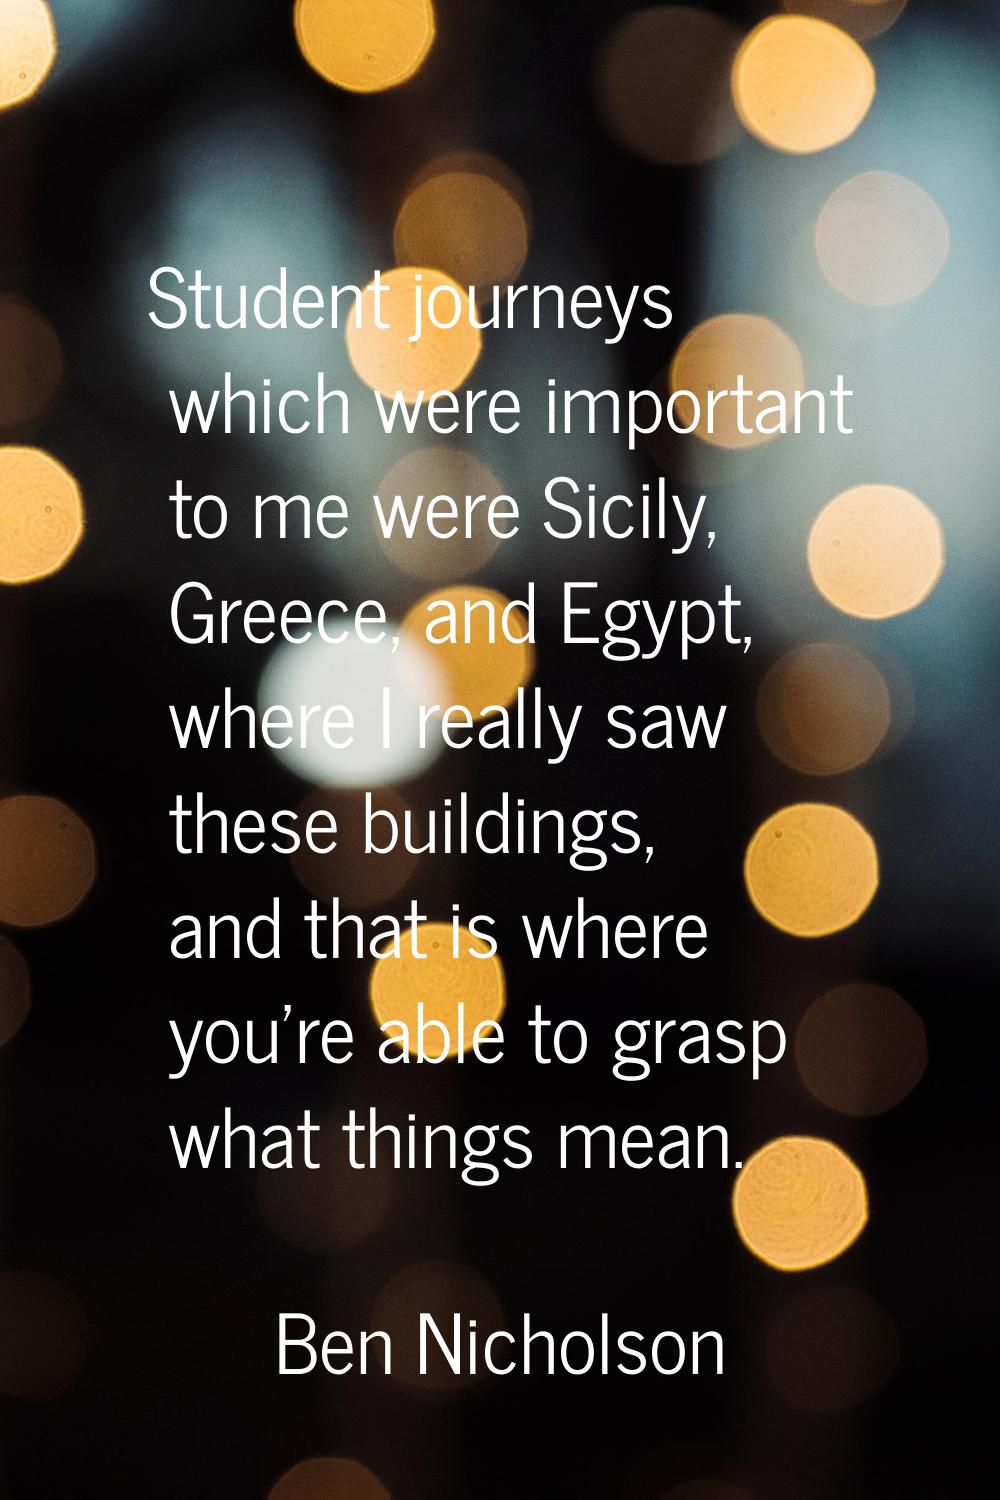 Student journeys which were important to me were Sicily, Greece, and Egypt, where I really saw thes